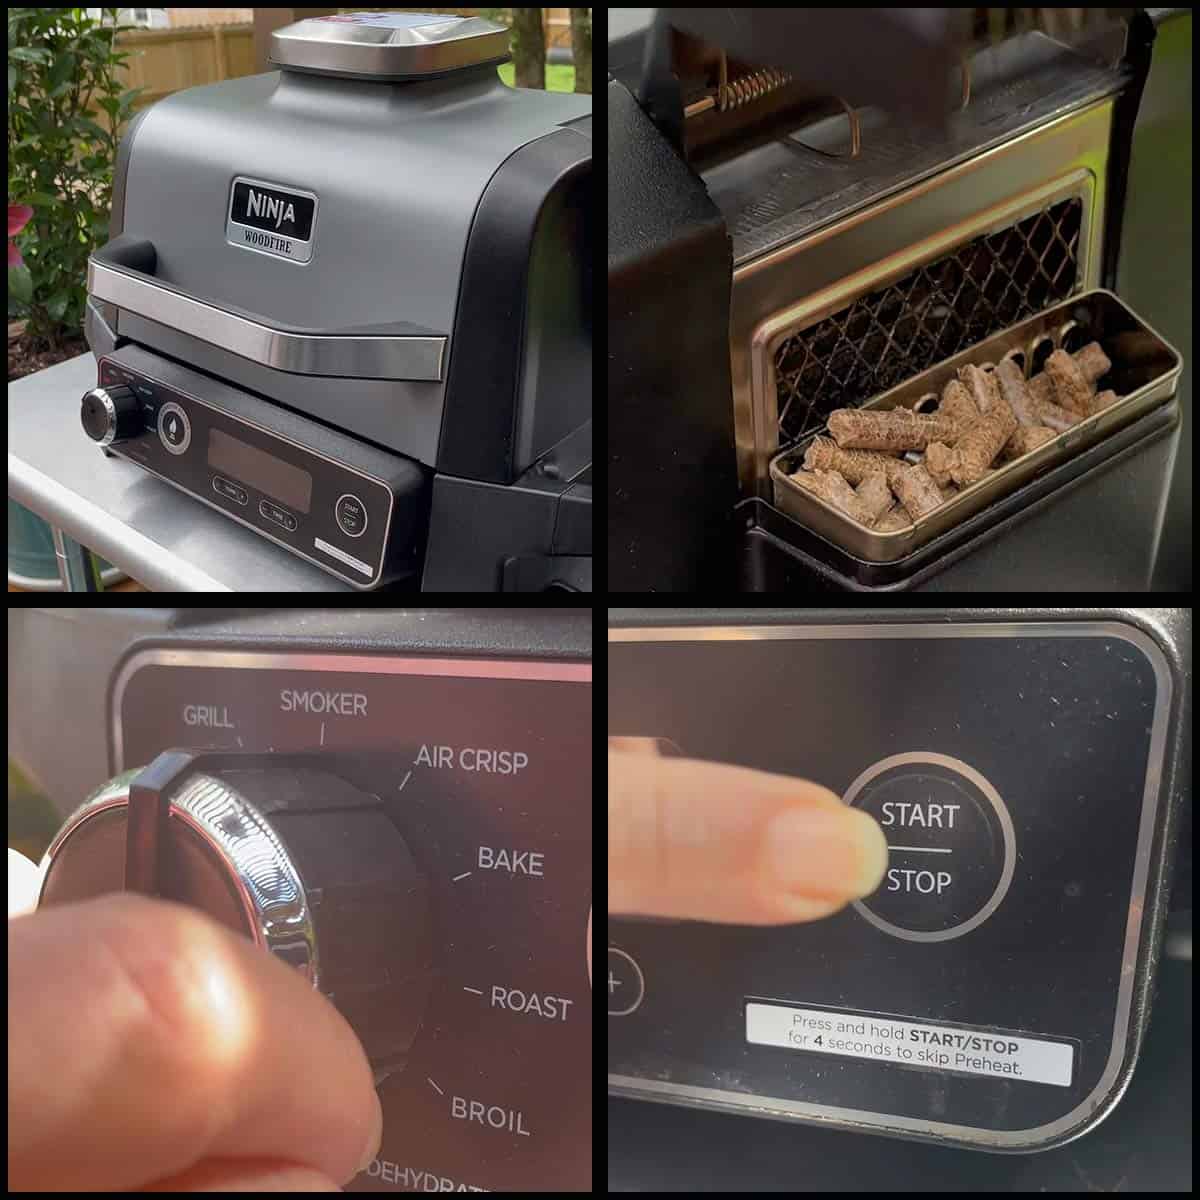 setting up the Ninja Woodfire by adding pellets and selecting the smoker function.